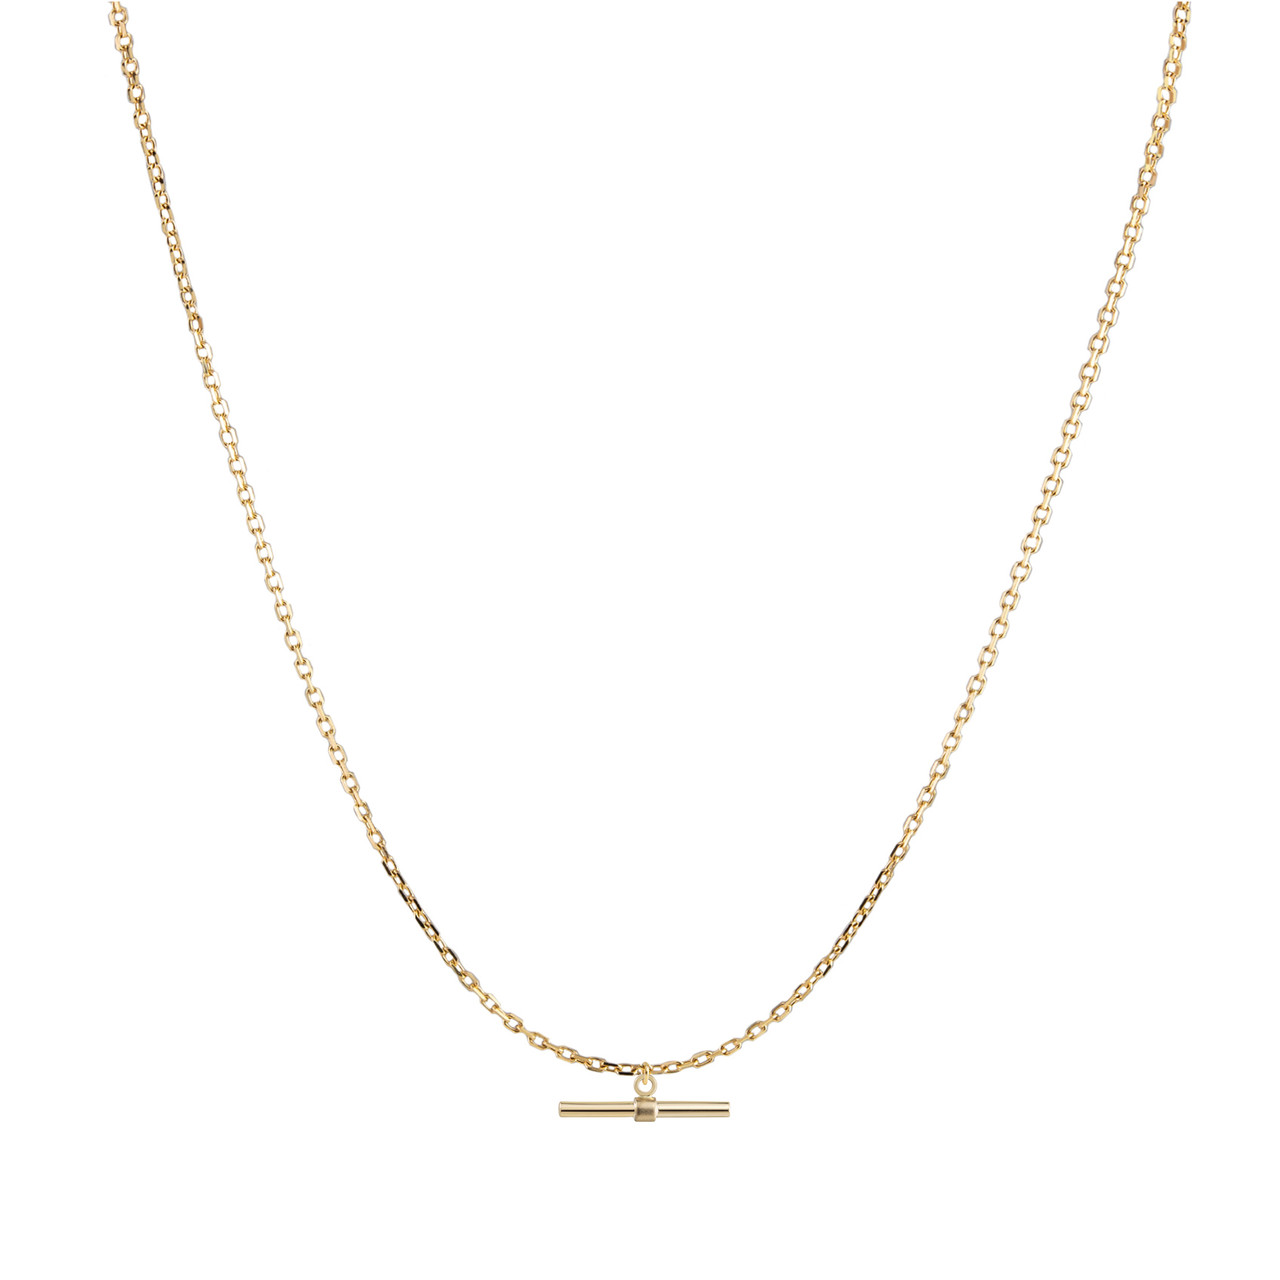 28" T BAR NECKLACE by metier by tomfoolery. Shop metier by tomfoolery online at tomfoolerylondon.co.uk